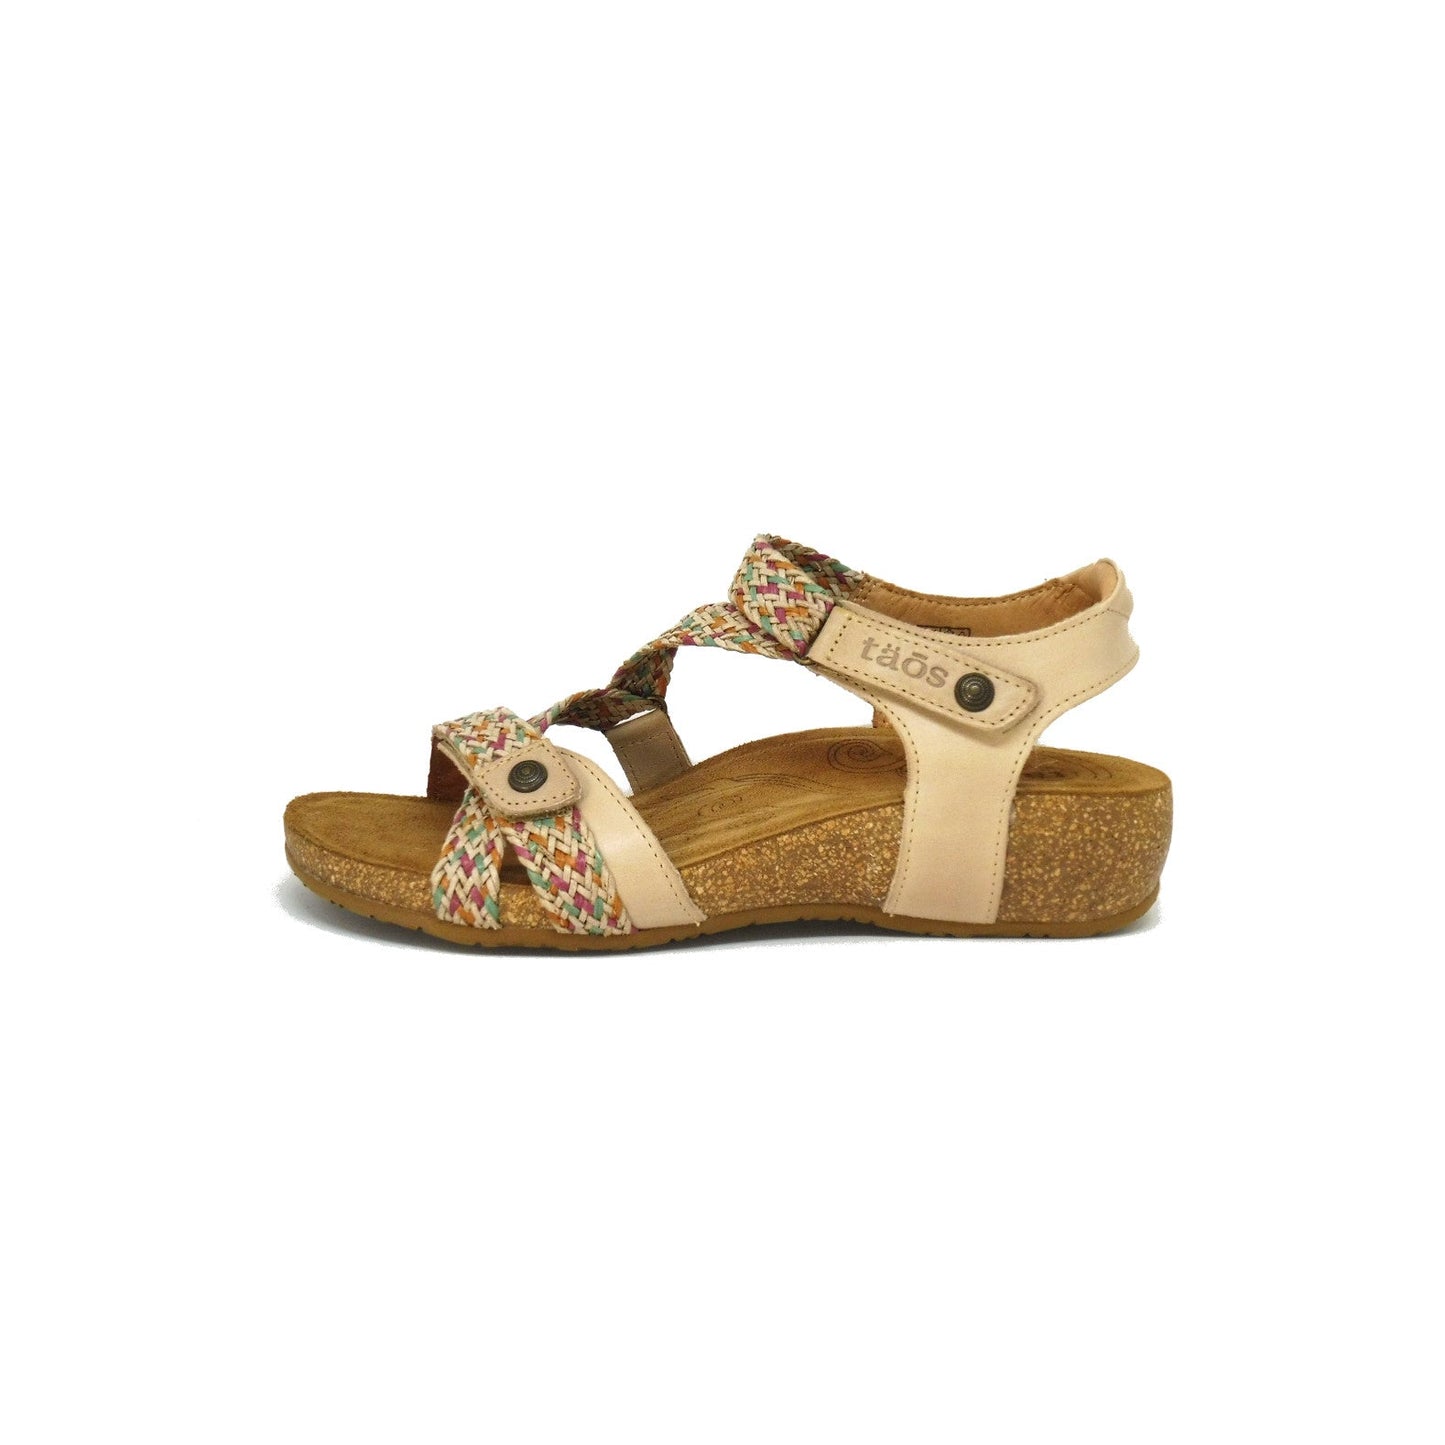 Trulie Sand Multi (size 39) - ONLINE ONLY